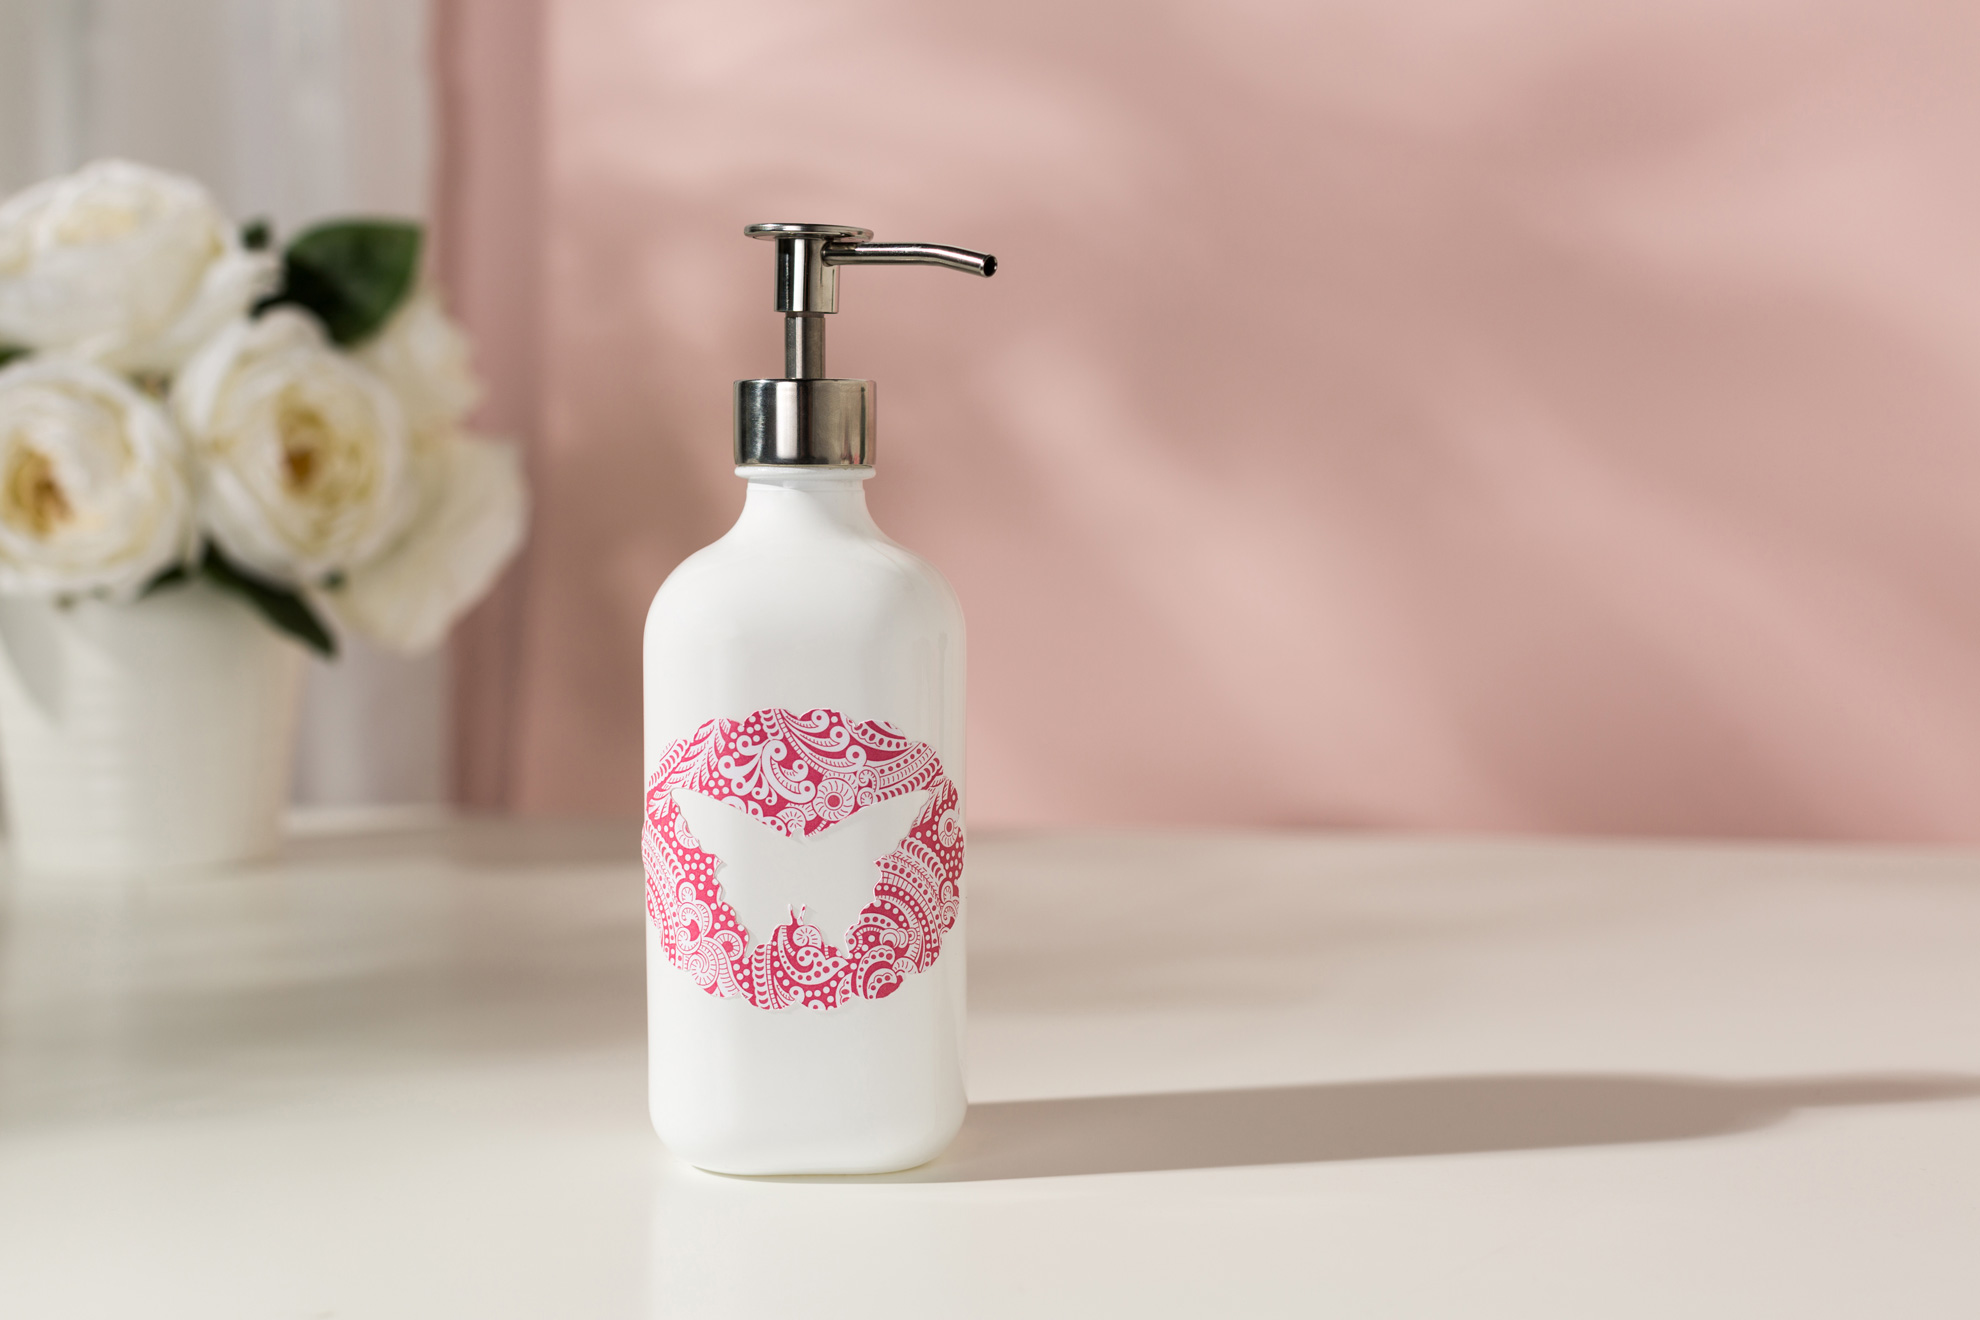 soap dispenser with butterfly design